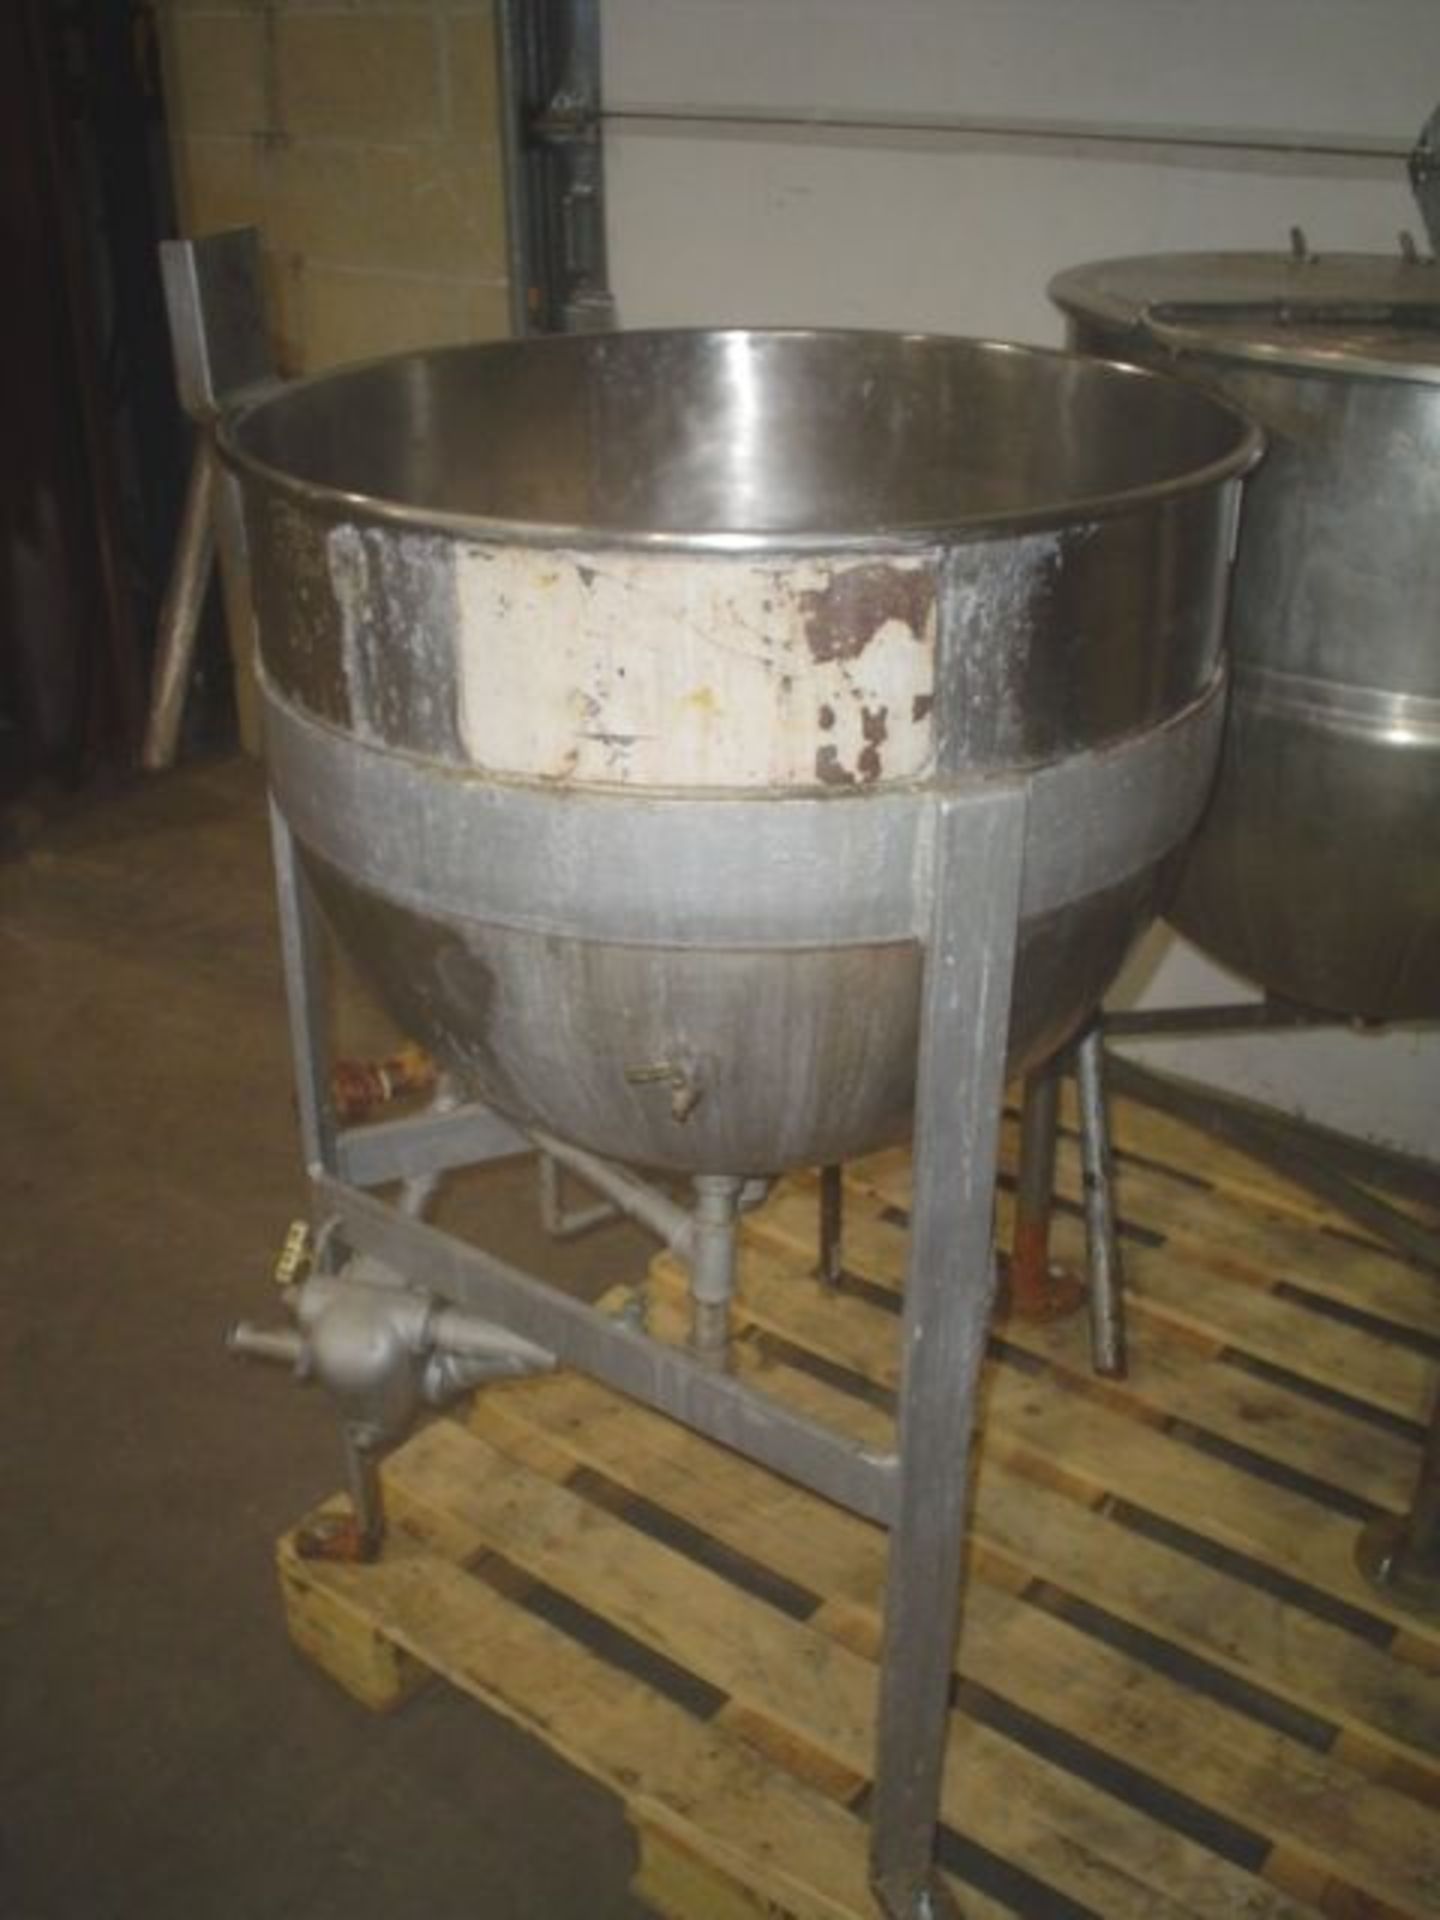 Used 30 Imperial Gallon Stainless Steel Jacketed Kettle.  Inside Measurements: Diameter 25” x 18”